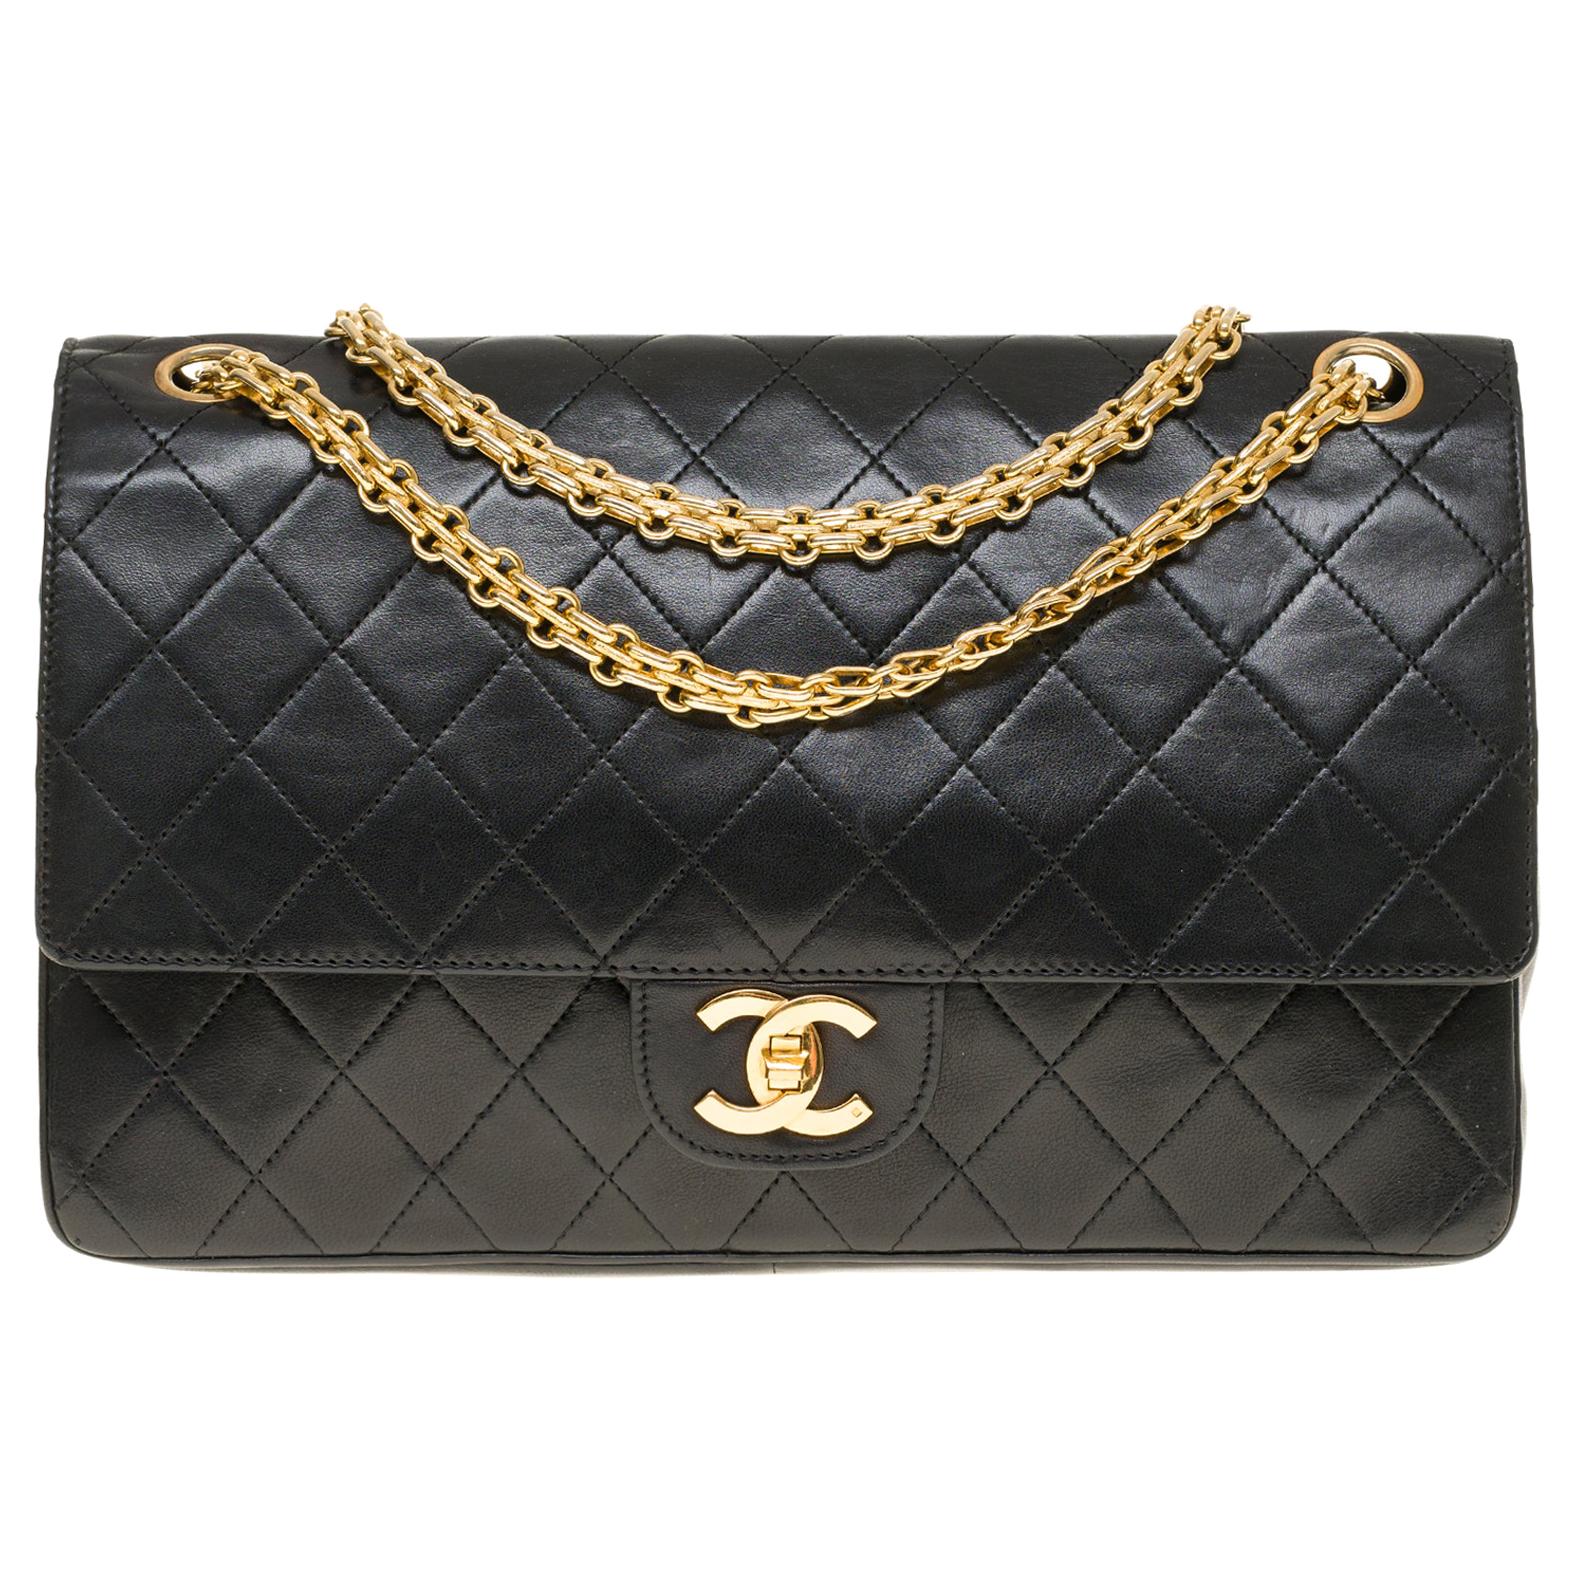 Chanel Classic shoulder bag in black quilted lambskin and gold hardware